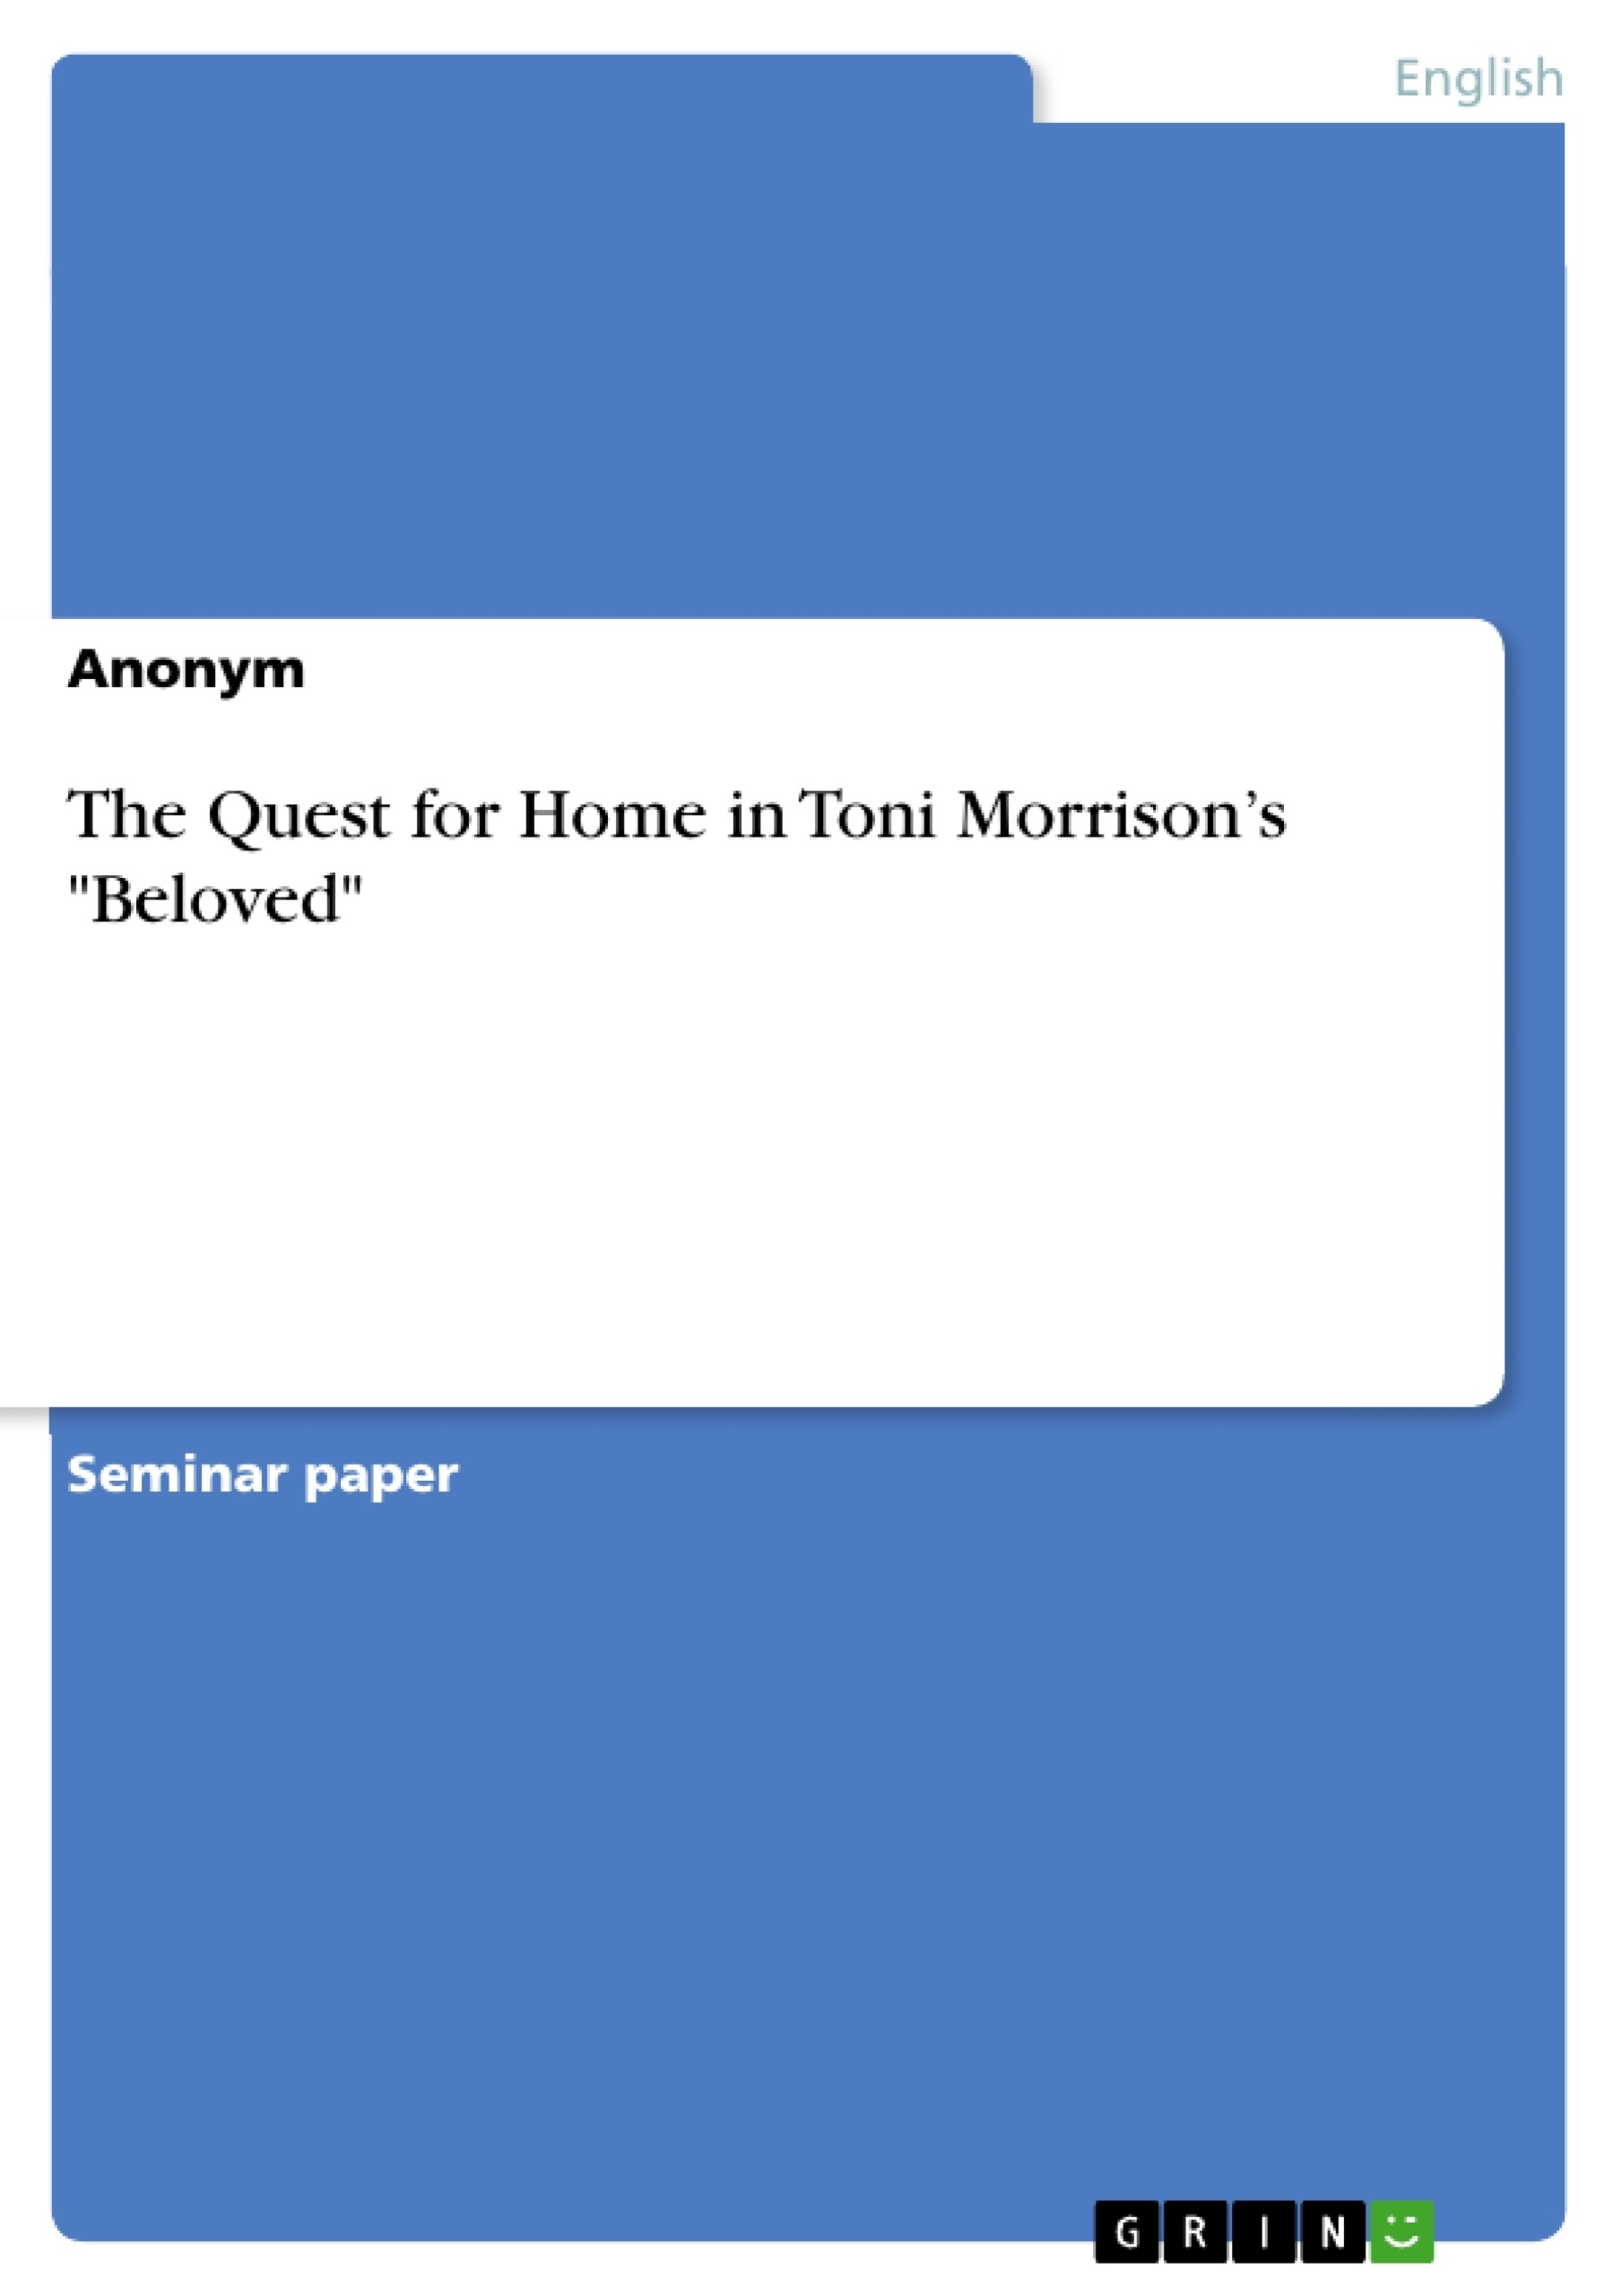 Title: The Quest for Home in Toni Morrison’s "Beloved"